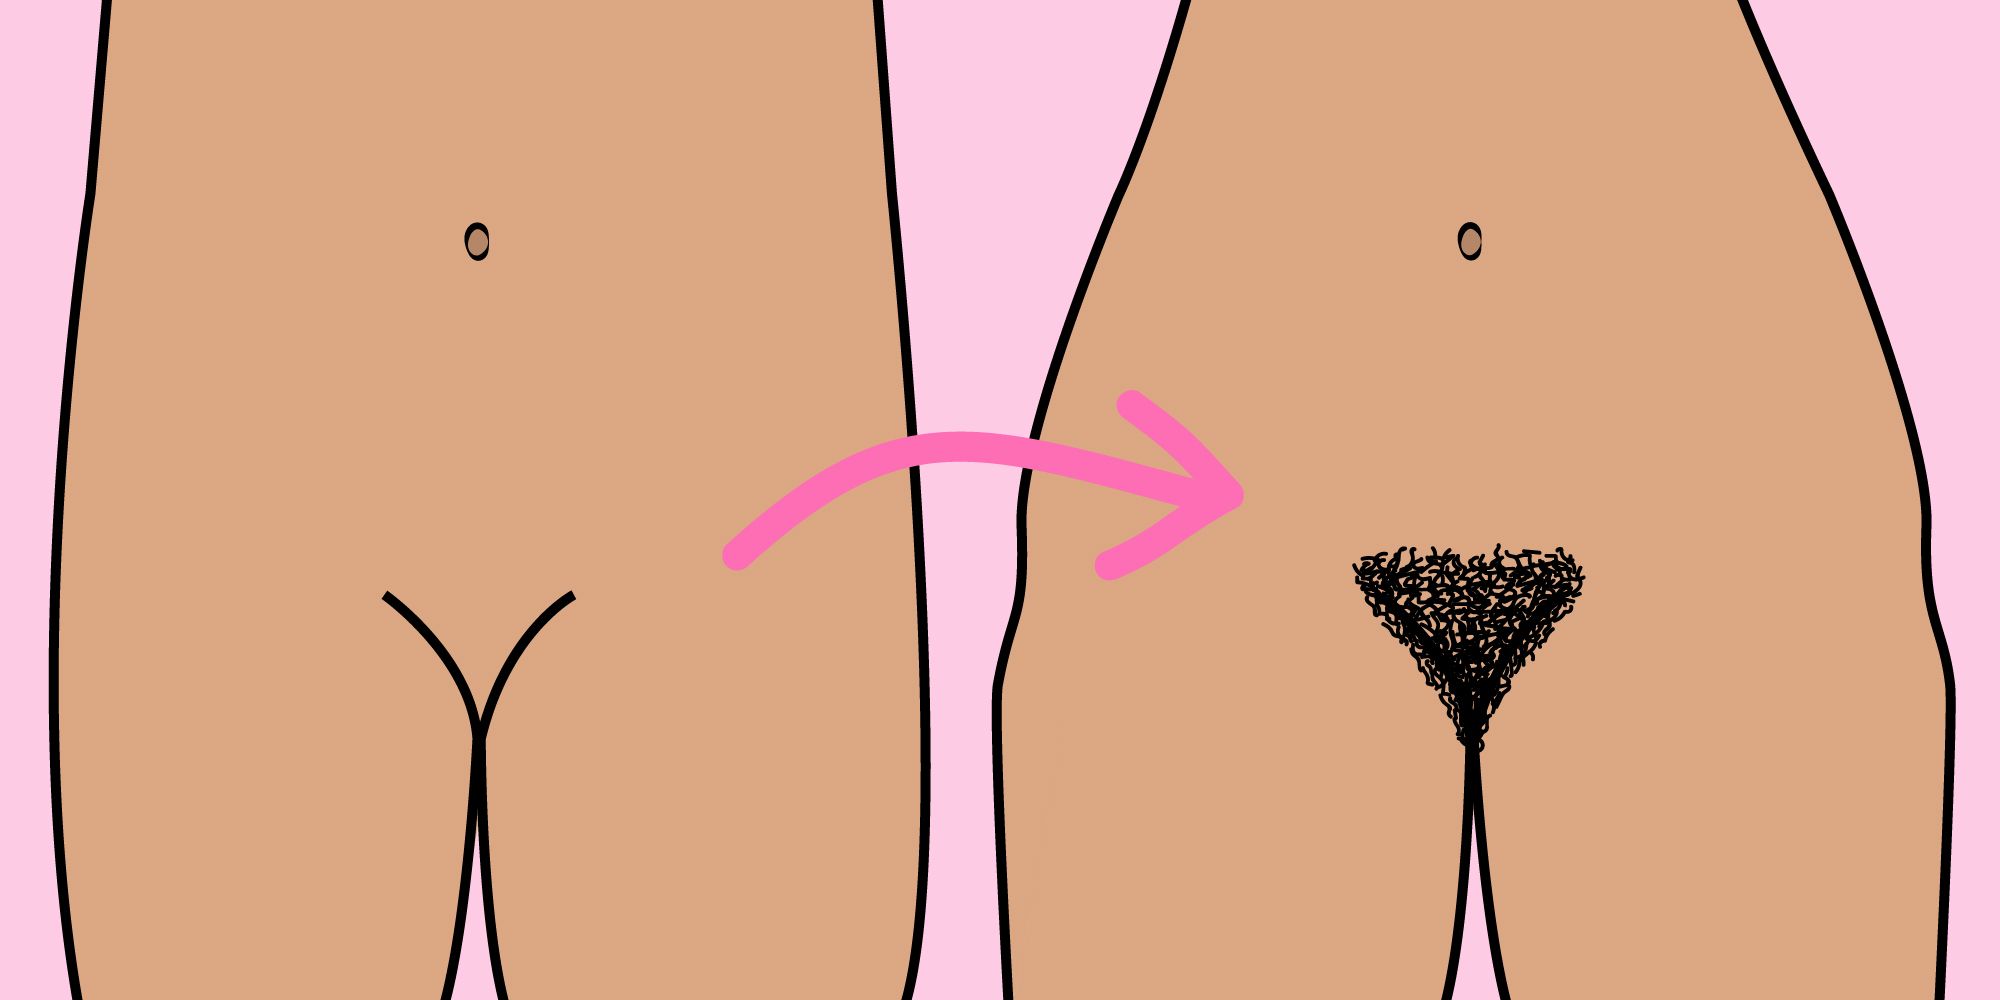 Bikini waxing is the removal of pubic hair using a special wax which can be...